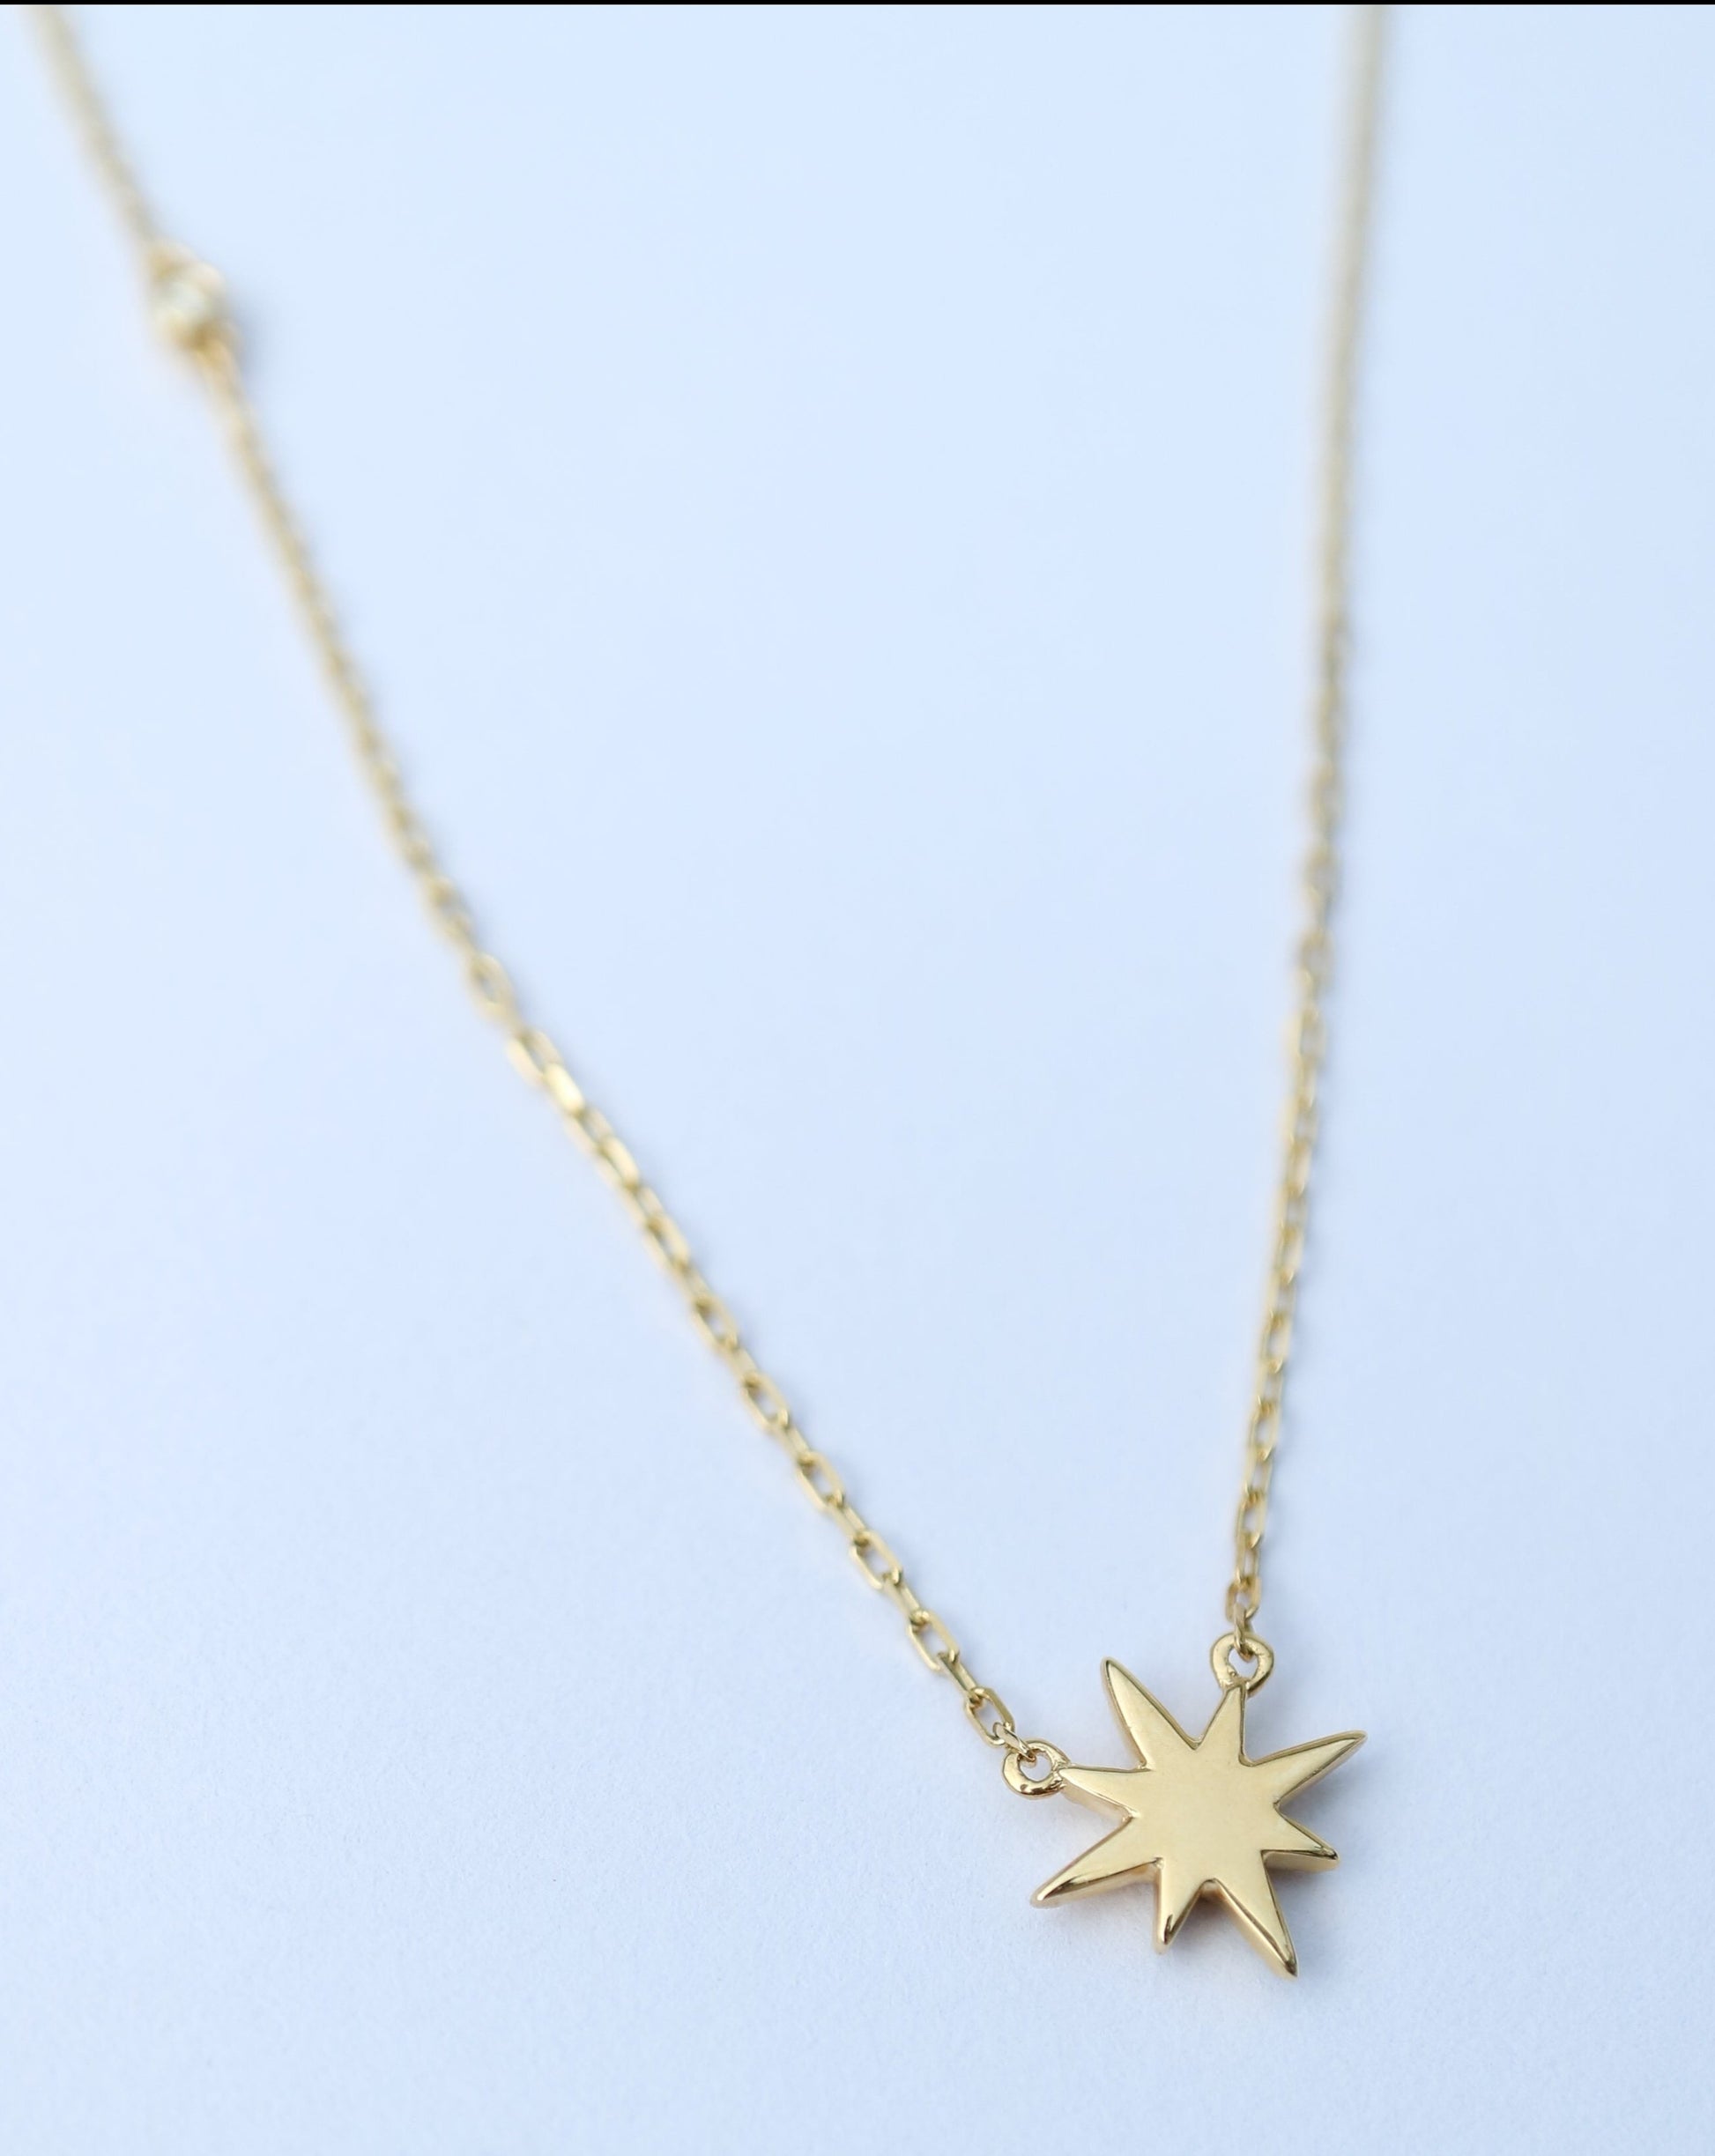 10kt gold and diamond stardust pendant by La Kaiser Jewelry